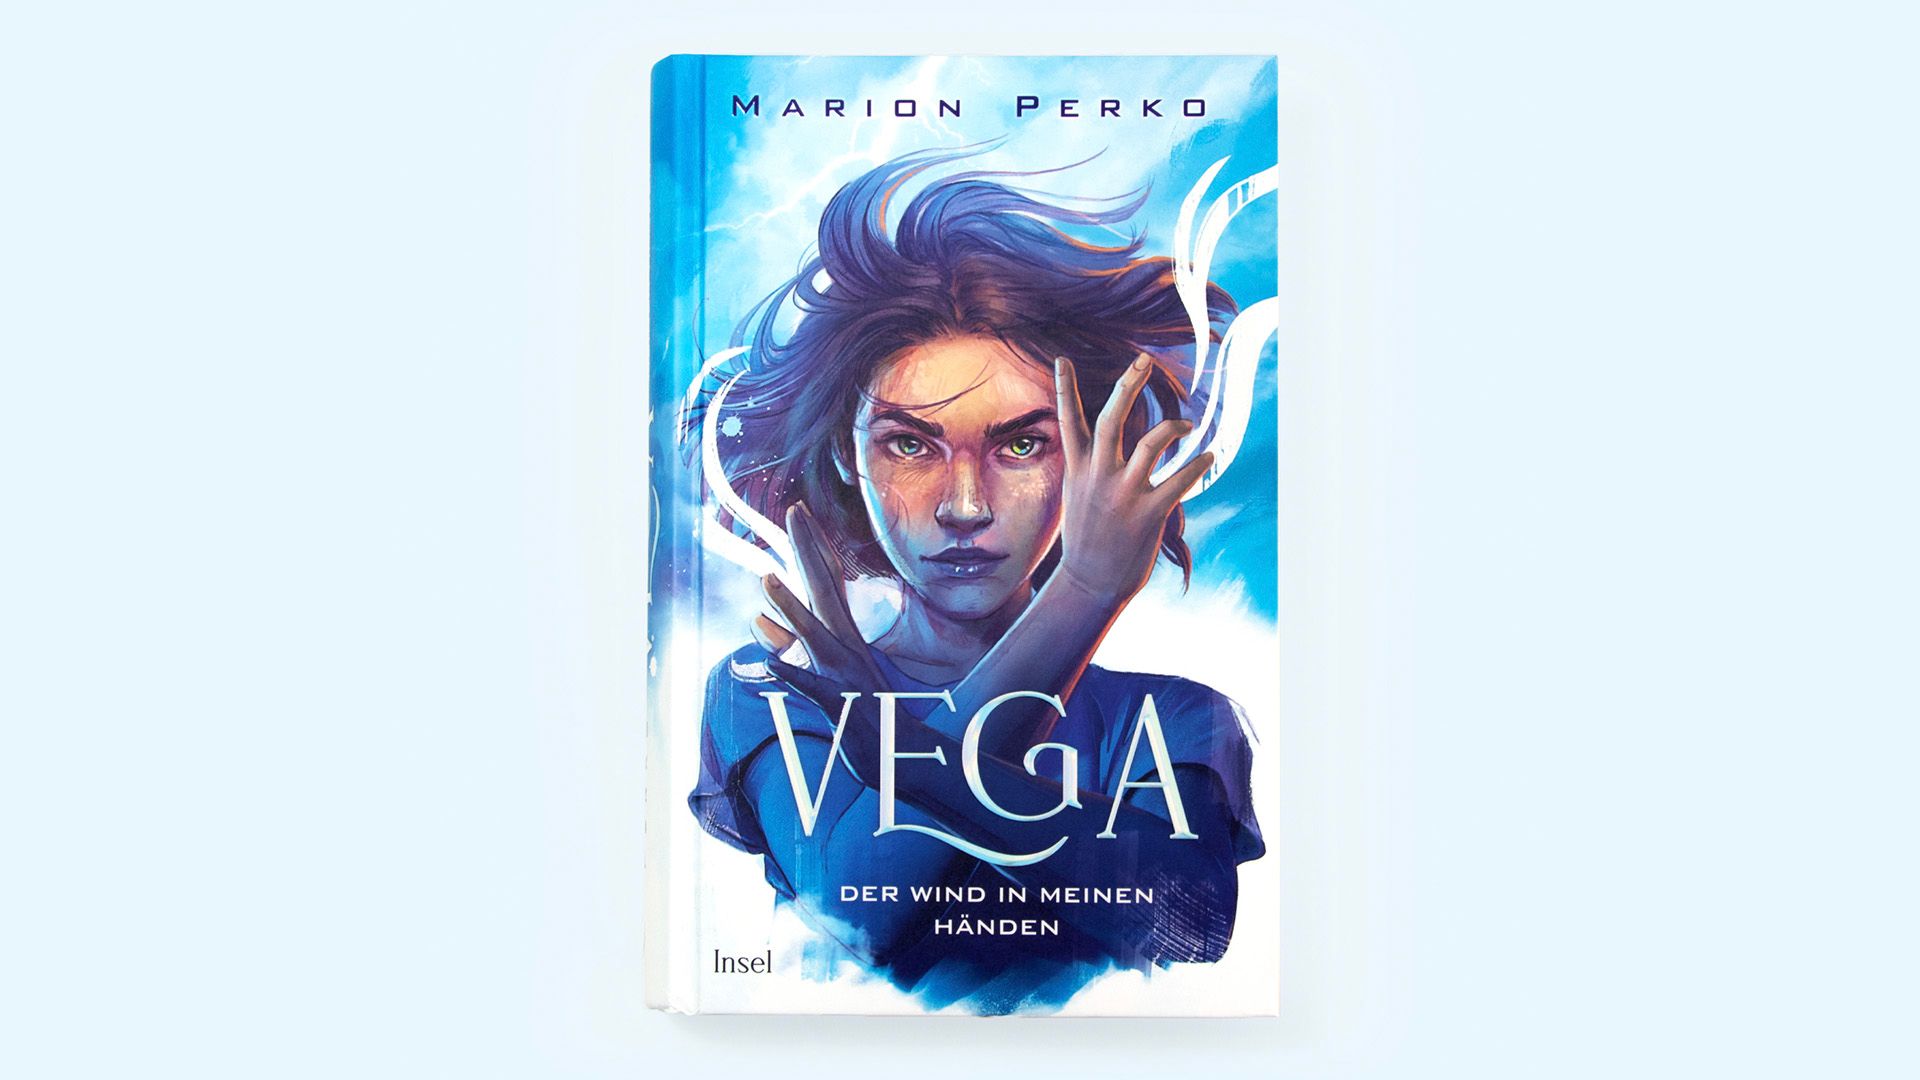 Beitrag zu Purest Serial Material: Follow Vega into the eye of the storm …